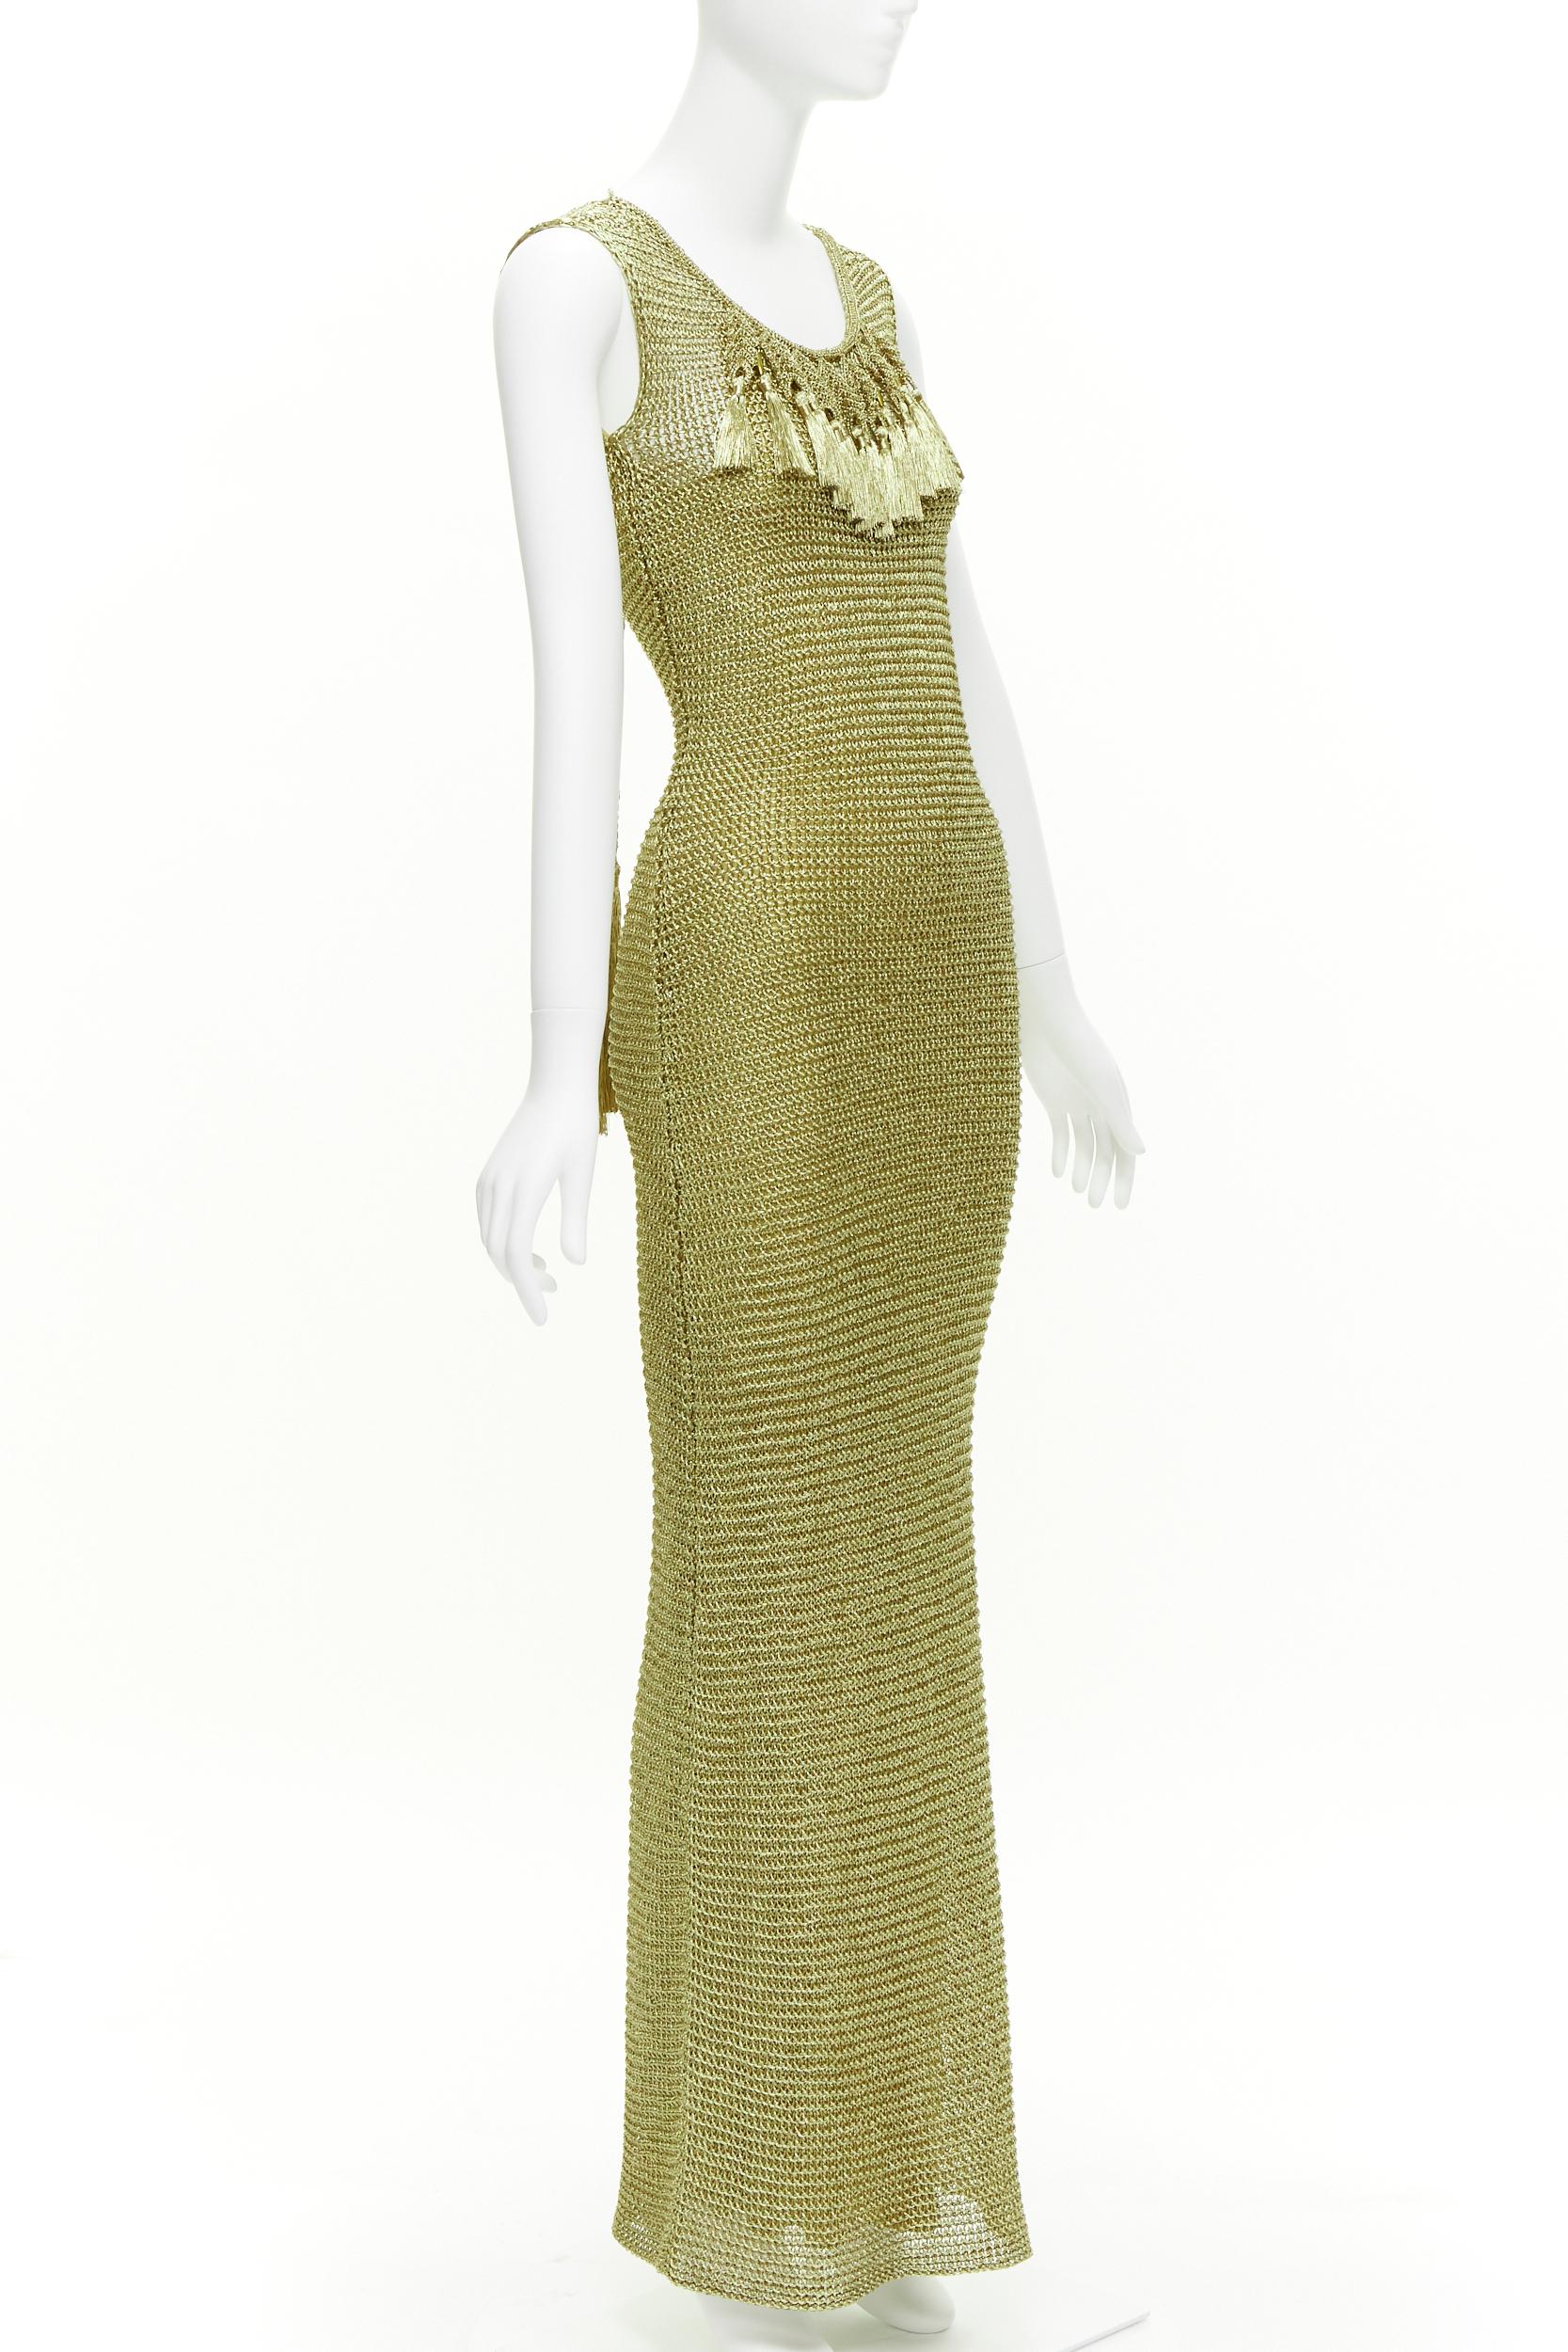 RALPH LAUREN PURPLE LABEL hand knit gold tassel crochet midi evening gown dress  In Excellent Condition For Sale In Hong Kong, NT